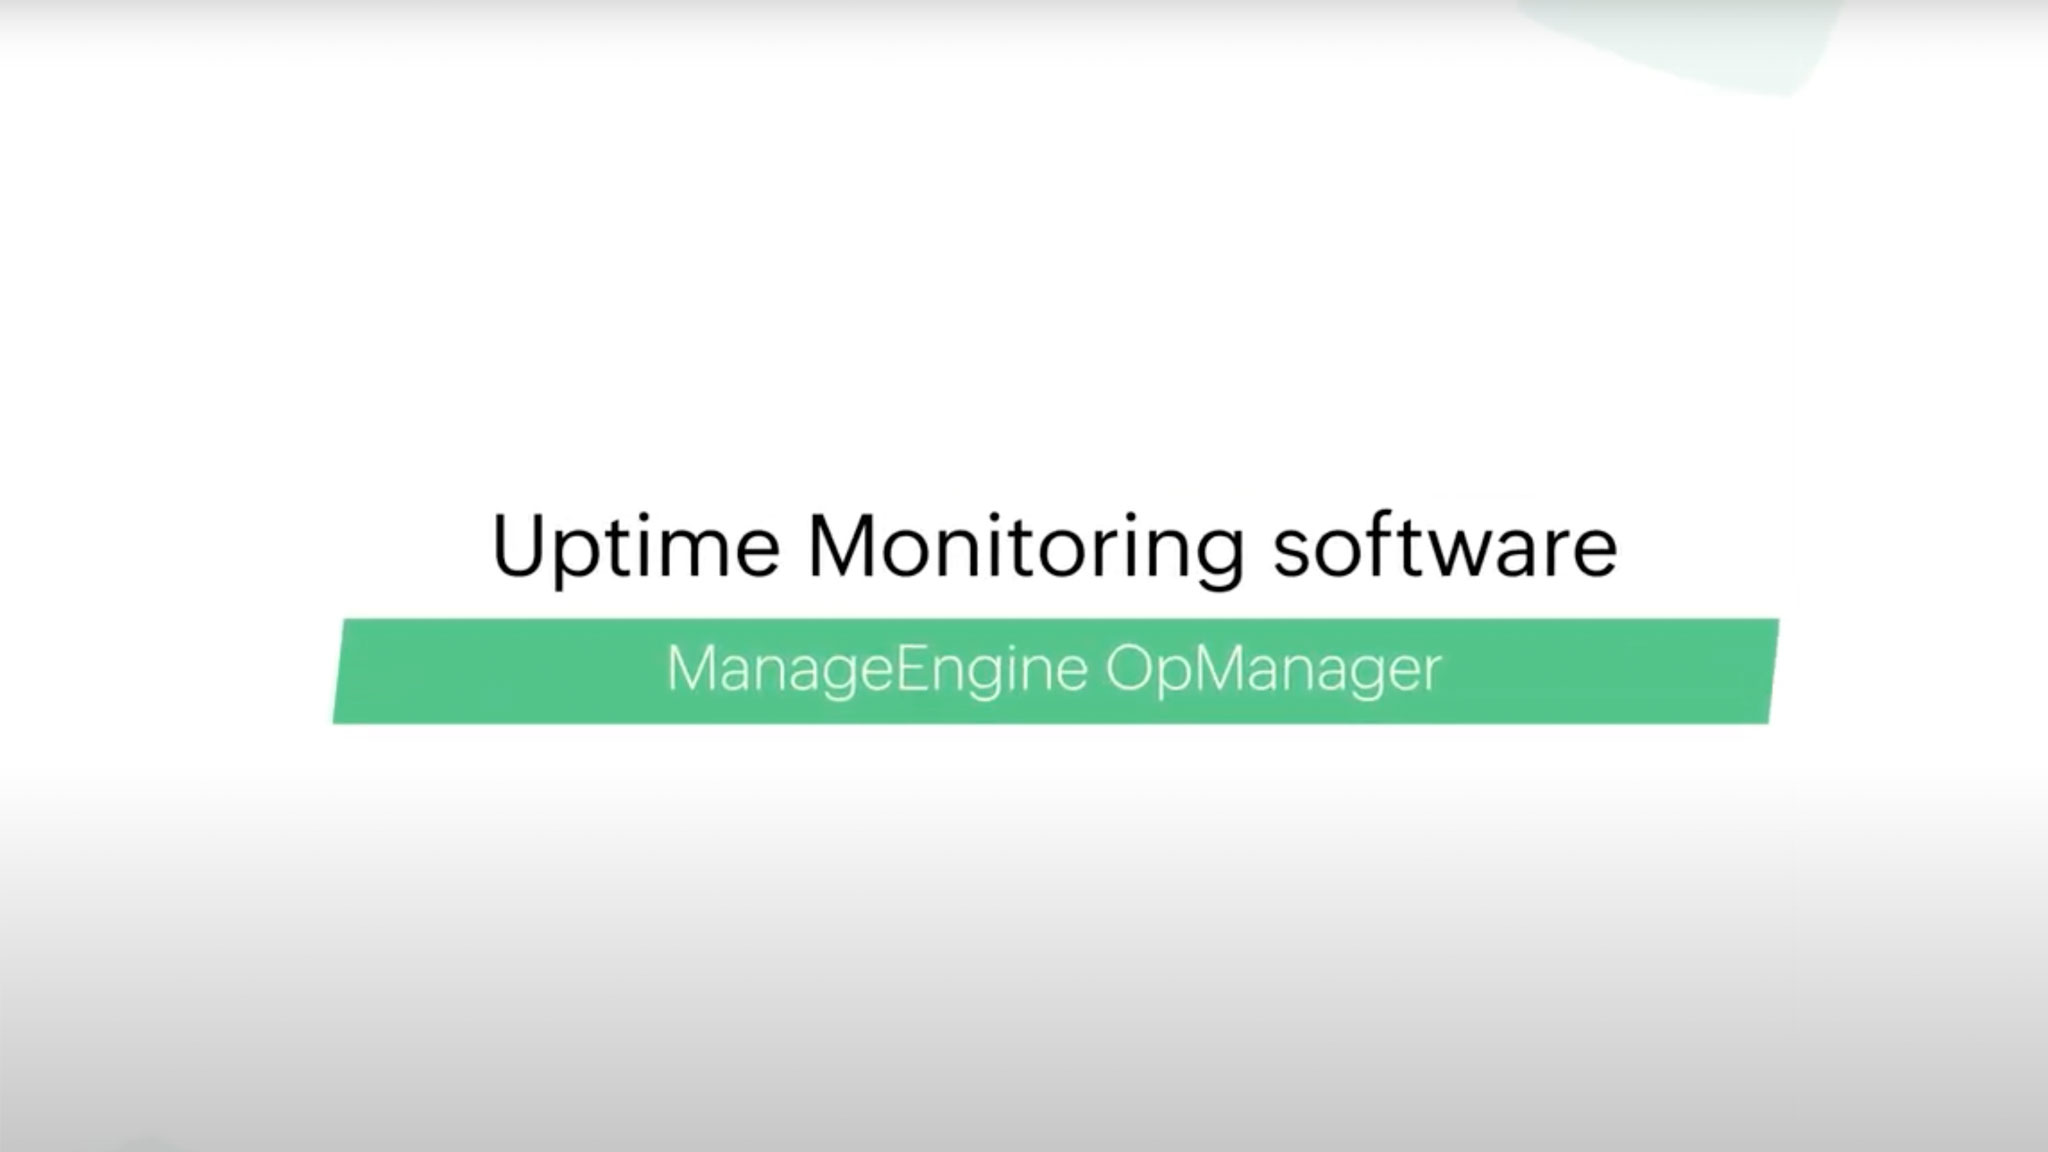 Uptime Monitoring - ManageEngine OpManager